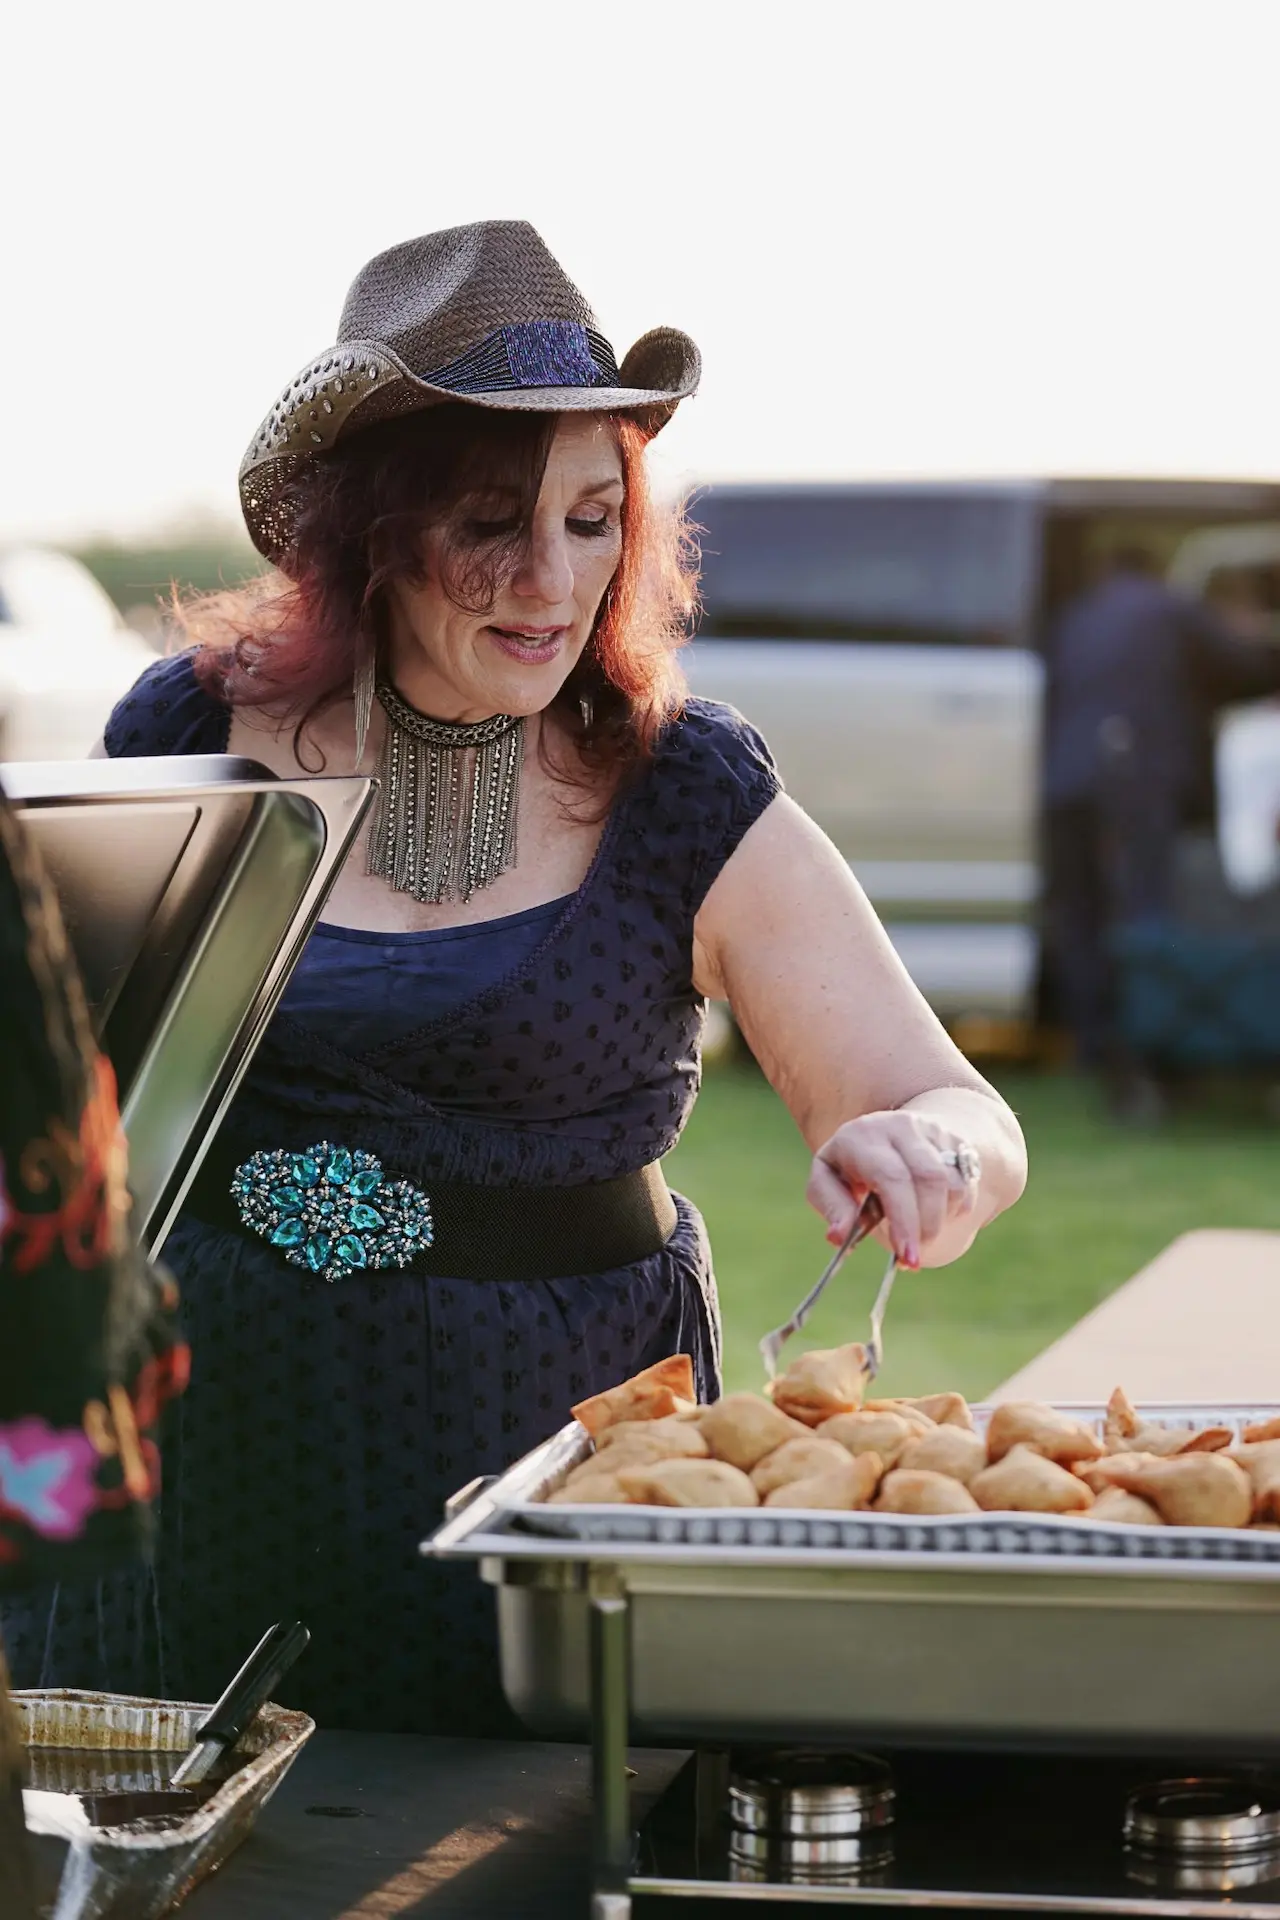 Food being served at Dust Bowl to Diamonds